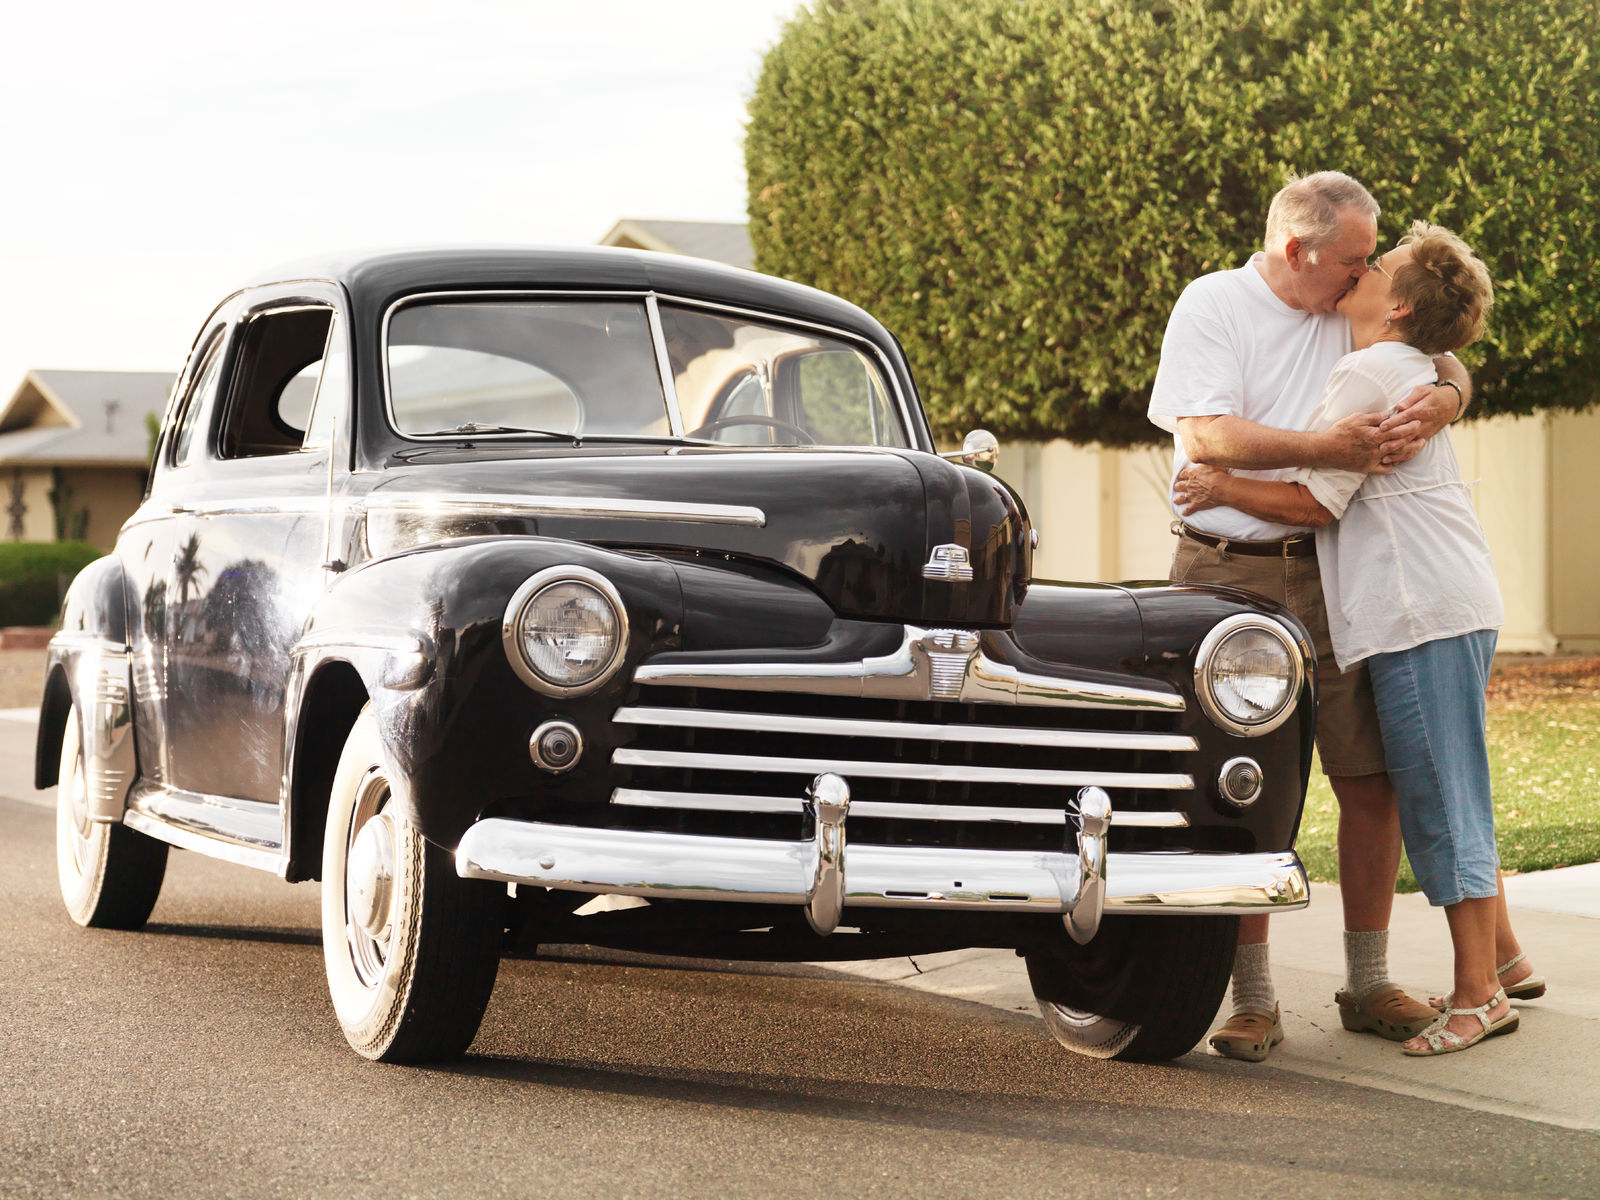 Classic Car Insurance That Doesn’t Require a Garage